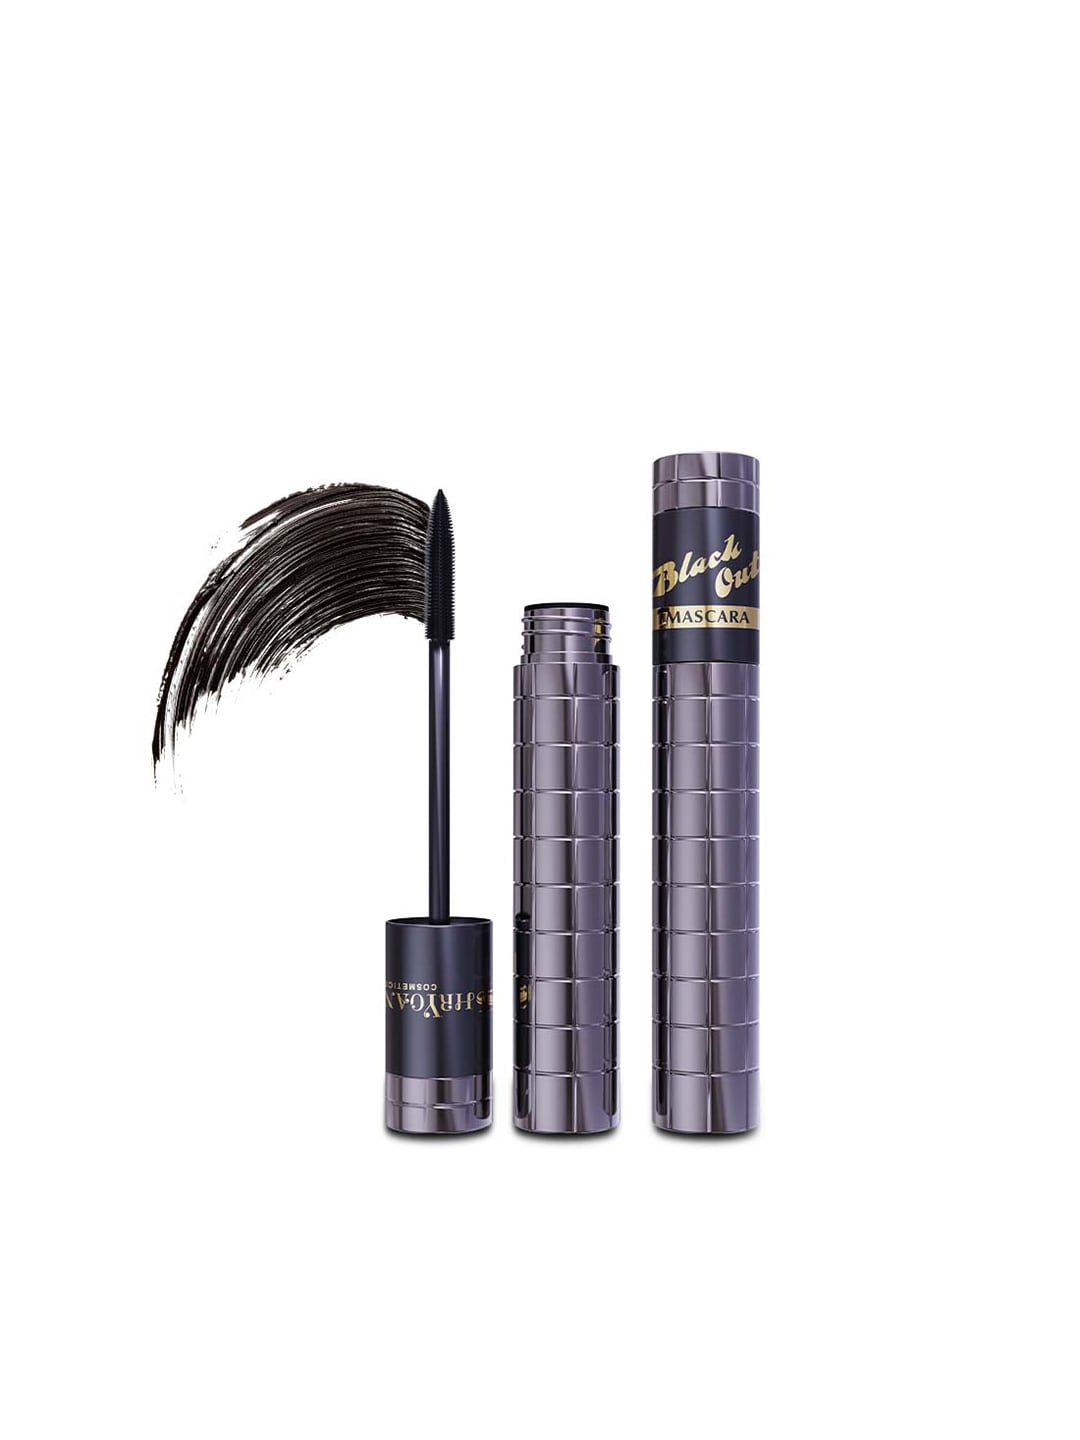 SHRYOAN Black Out Mascara-10 gm Price in India